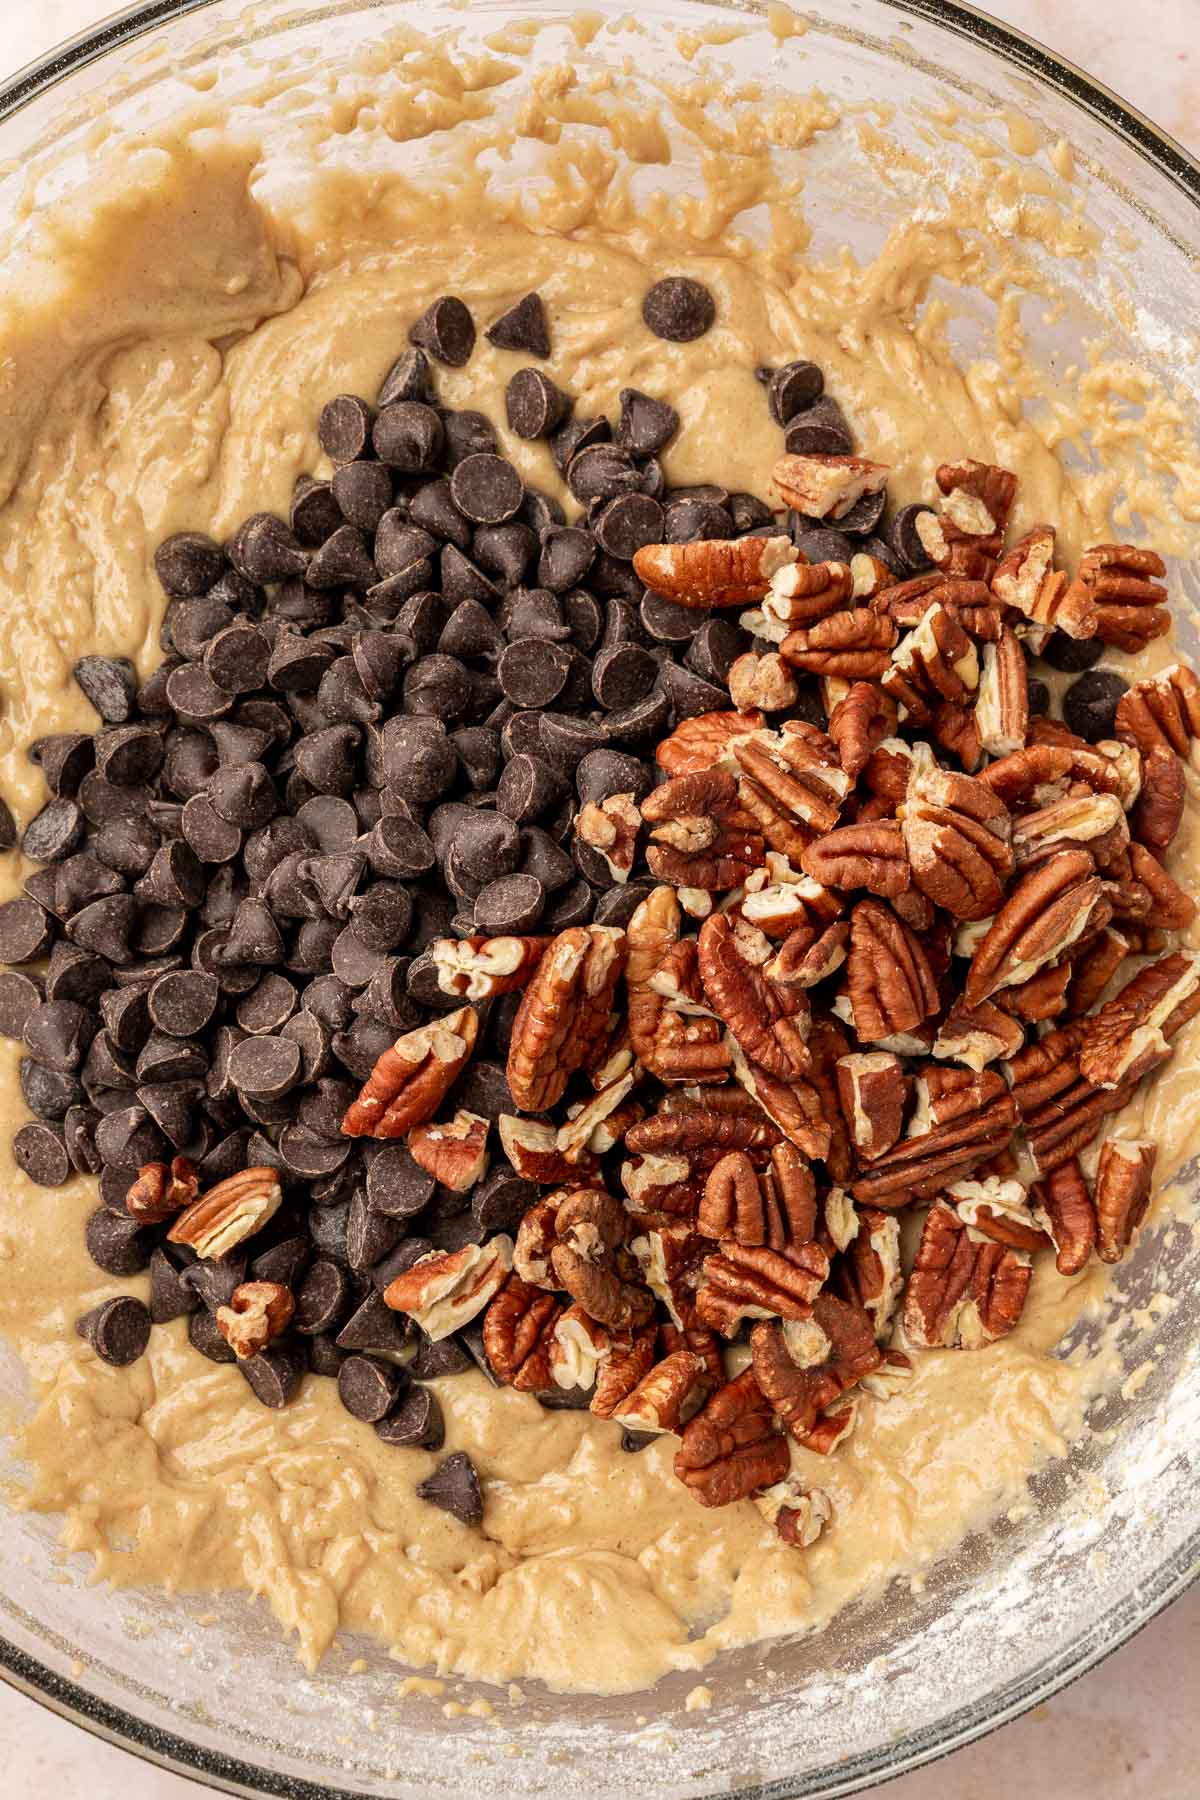 A close up of gluten free chocolate chip cookie dough topped with a pile of dark chocolate chips and toasted pecans before mixing together.